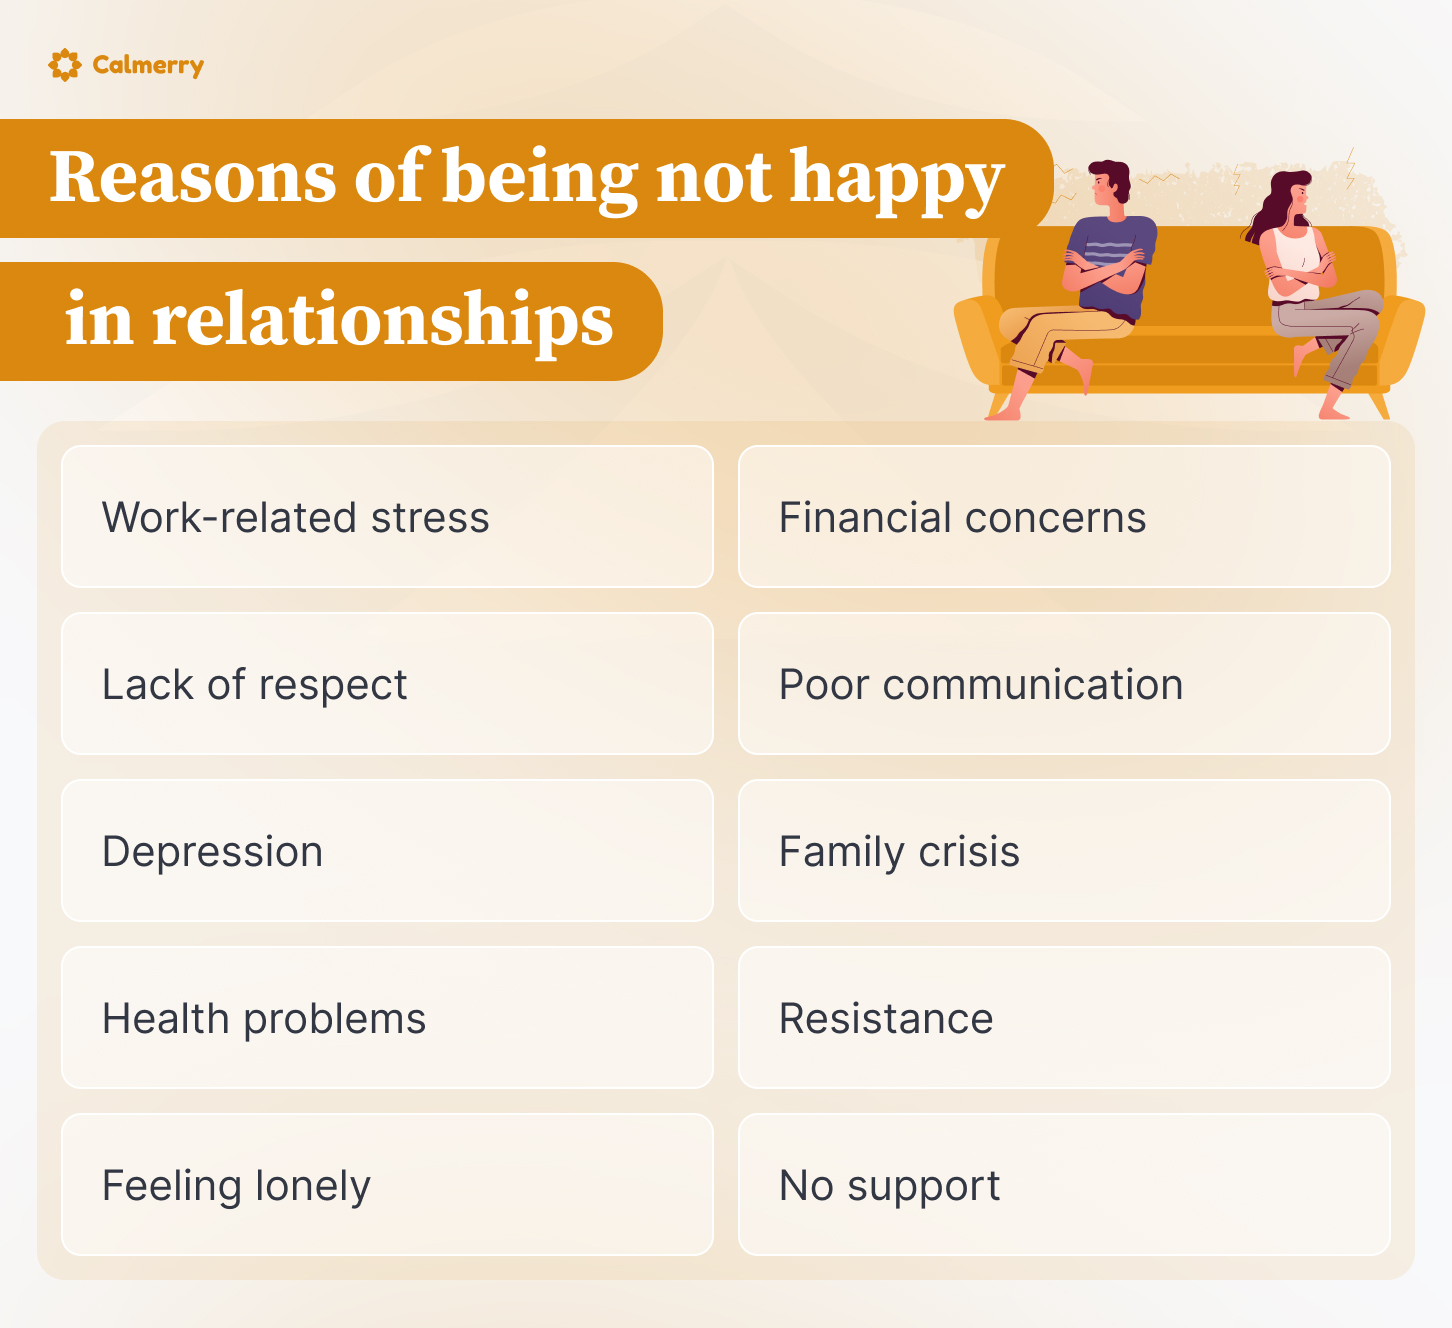 The image presents an infographic titled "Reasons of being not happy in relationships." Below the title, the image lists ten common reasons for relationship unhappiness:
Work-related stress
Financial concerns
Lack of respect
Poor communication
Depression
Family crisis
Health problems
Resistance
Feeling lonely
No support
This infographic is a resource for identifying potential sources of relationship dissatisfaction.